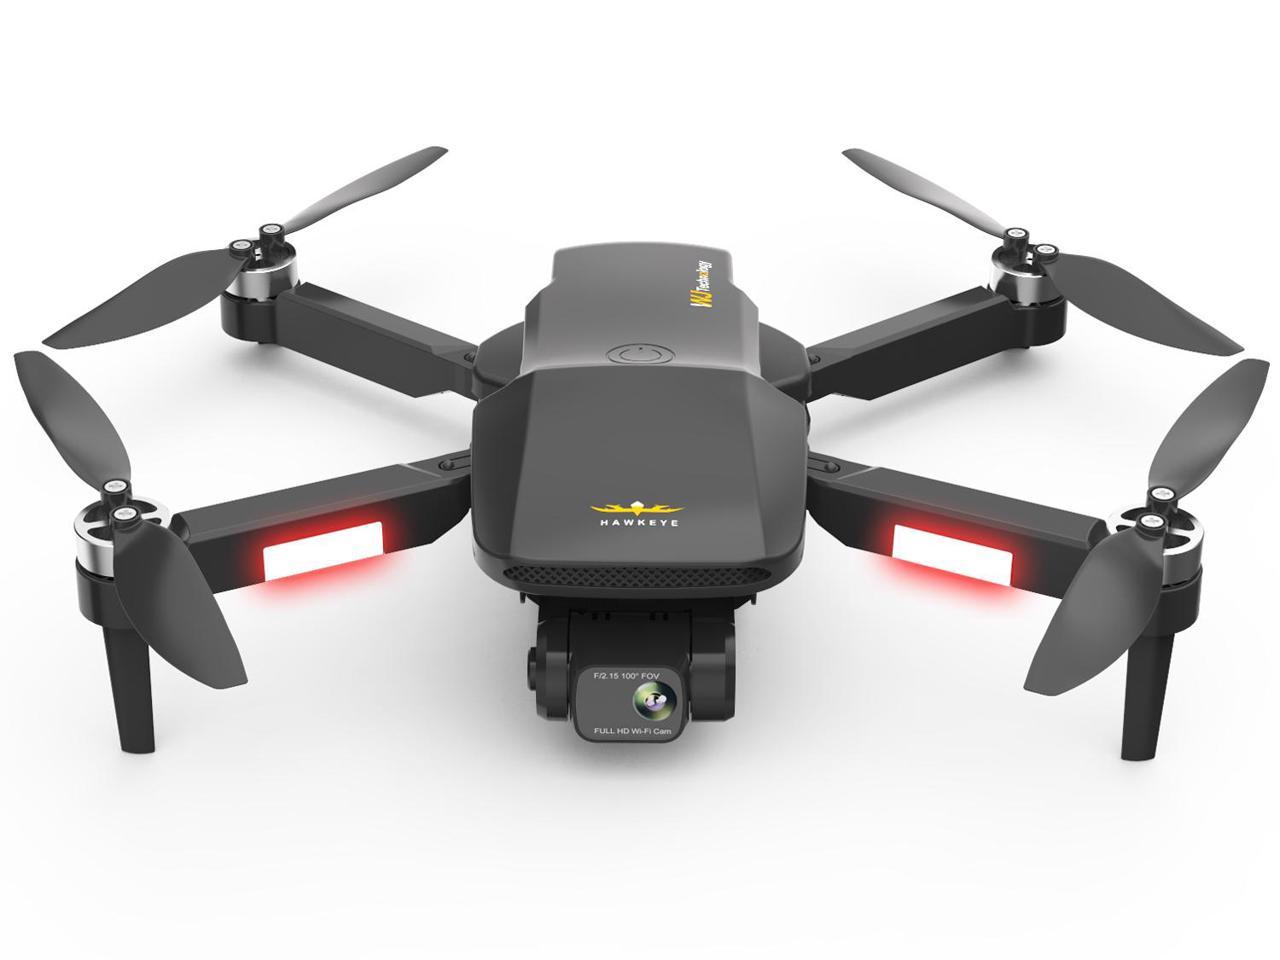 GPS Drone with Camera 4K,3-axis Gimbal, Quadcopter for , Brushless Motor, 60 Mins Flight Time, Support TF Card,5GHz WiFi Transmission, Follow Auto Return Home - Newegg.com